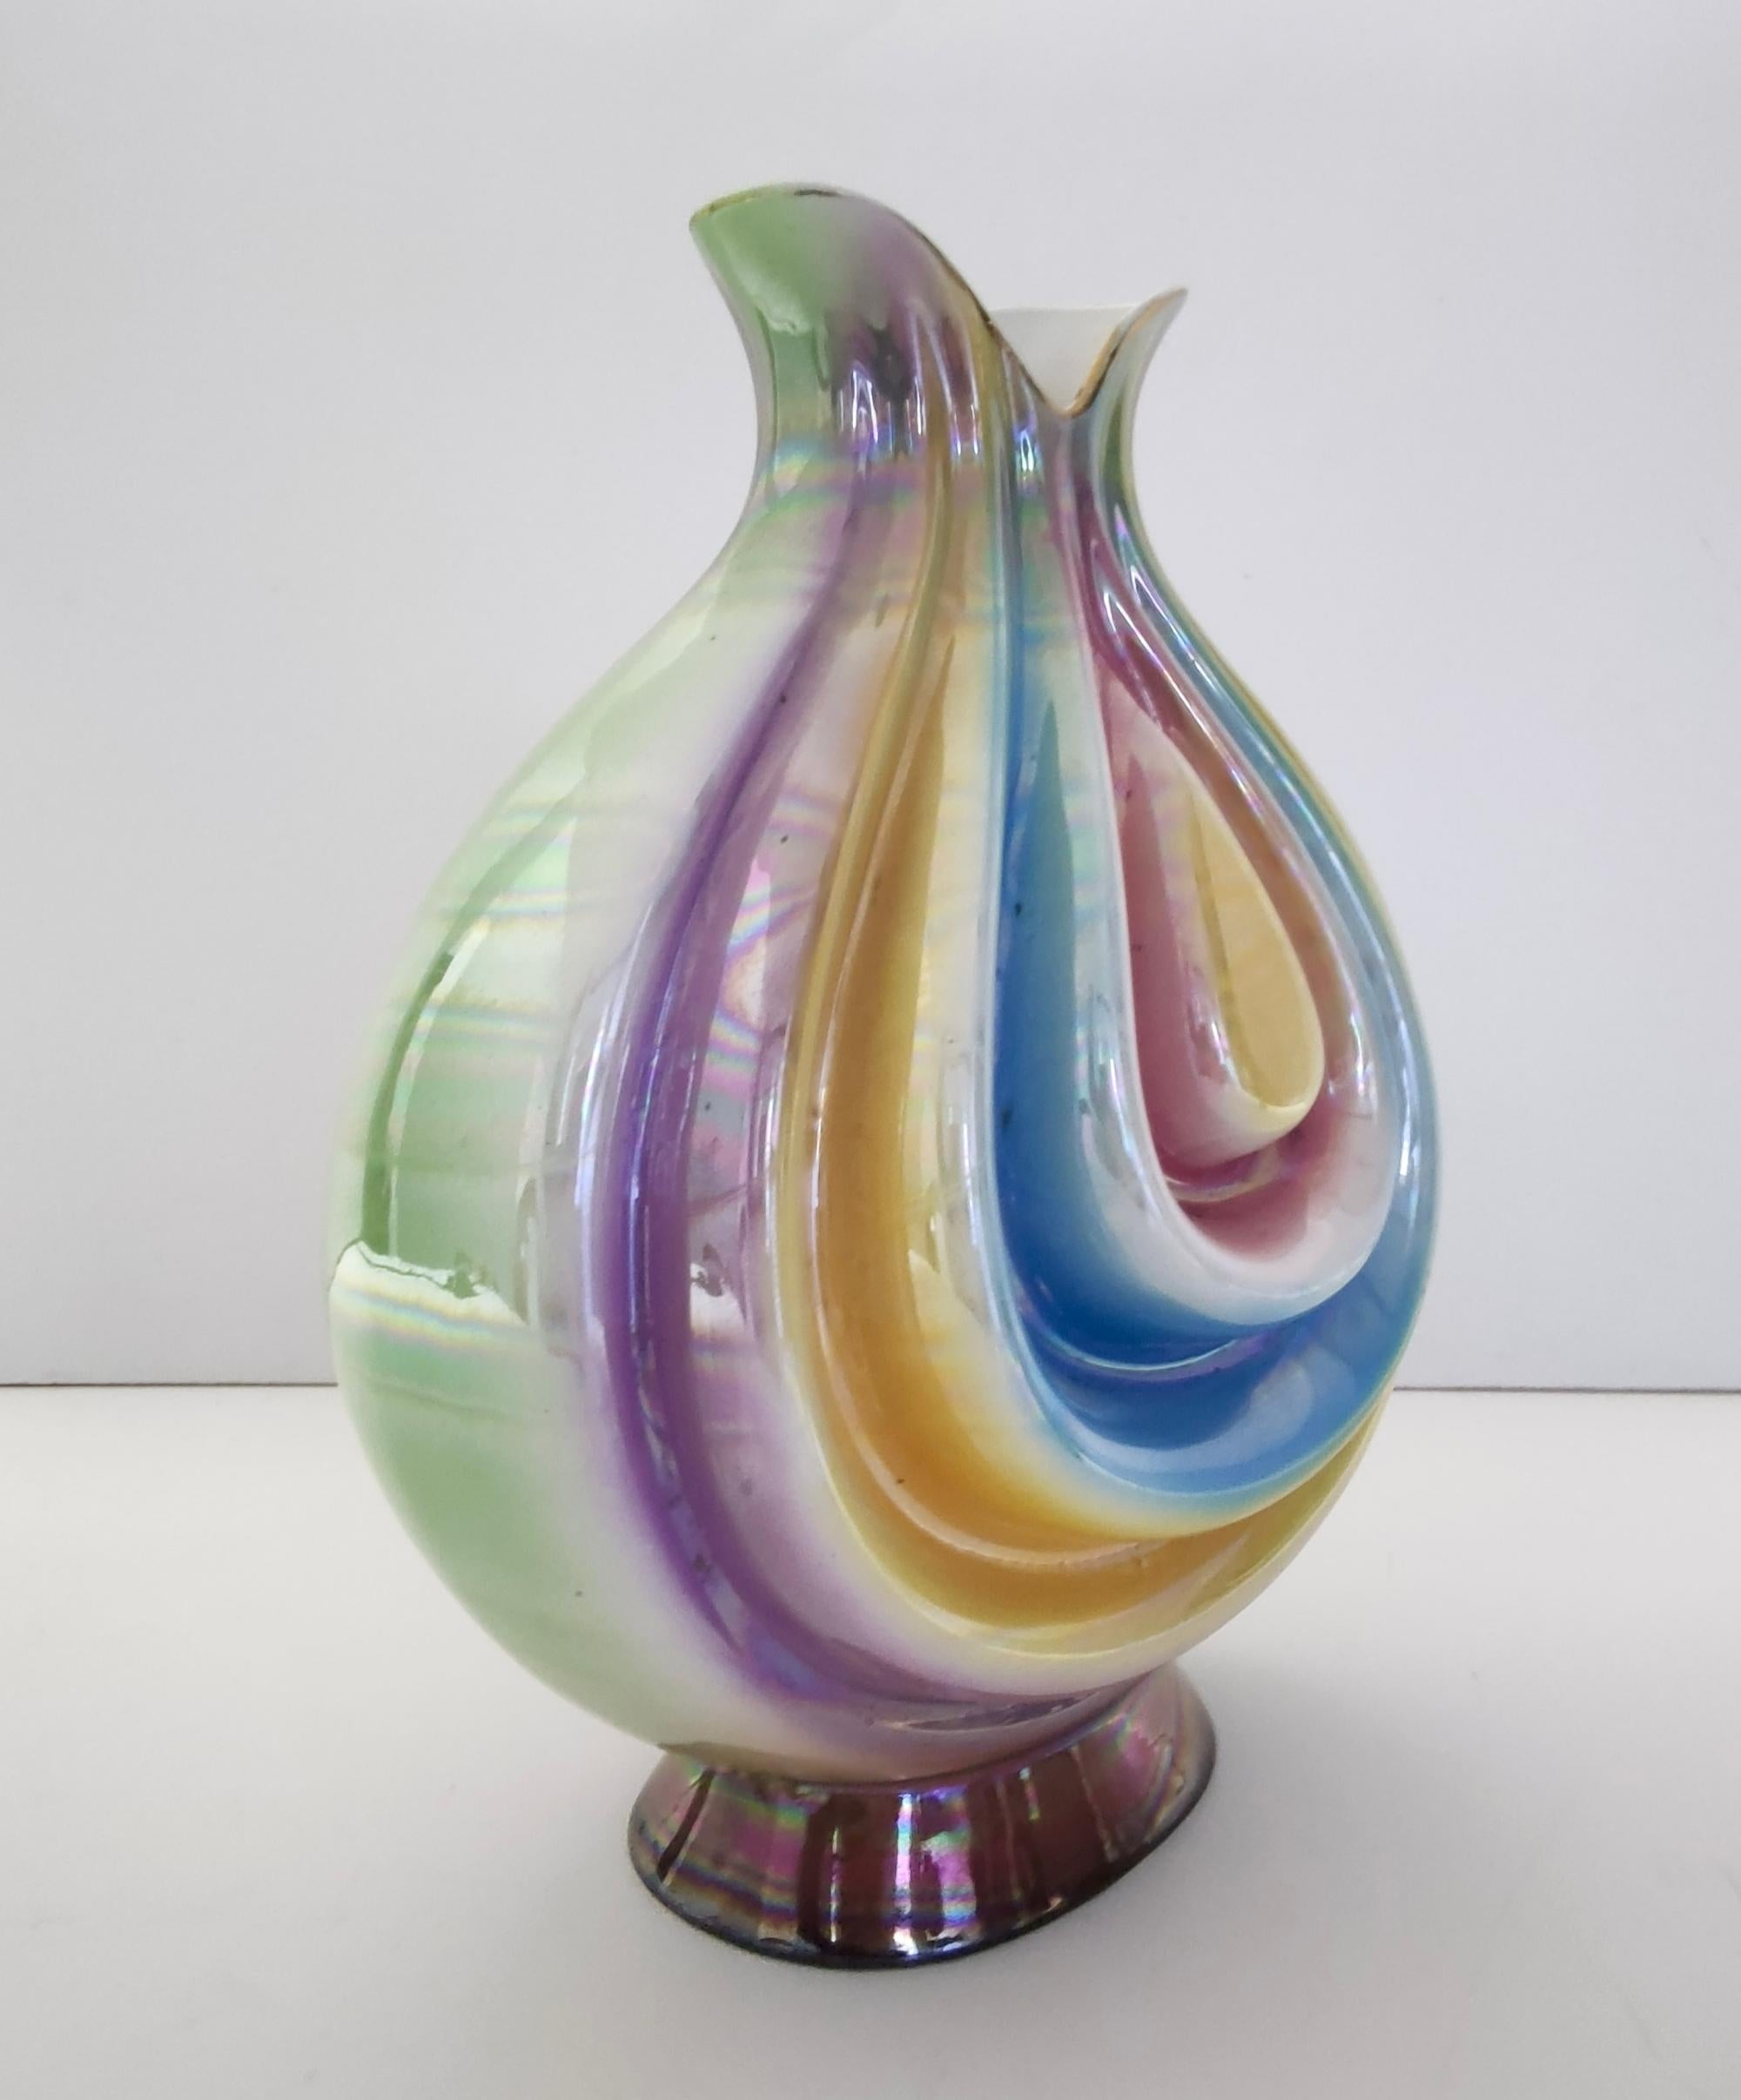 Vintage Ceramic Vase Attributed to Italo Casini with Iridescent Colors, Italy In Good Condition For Sale In Bresso, Lombardy